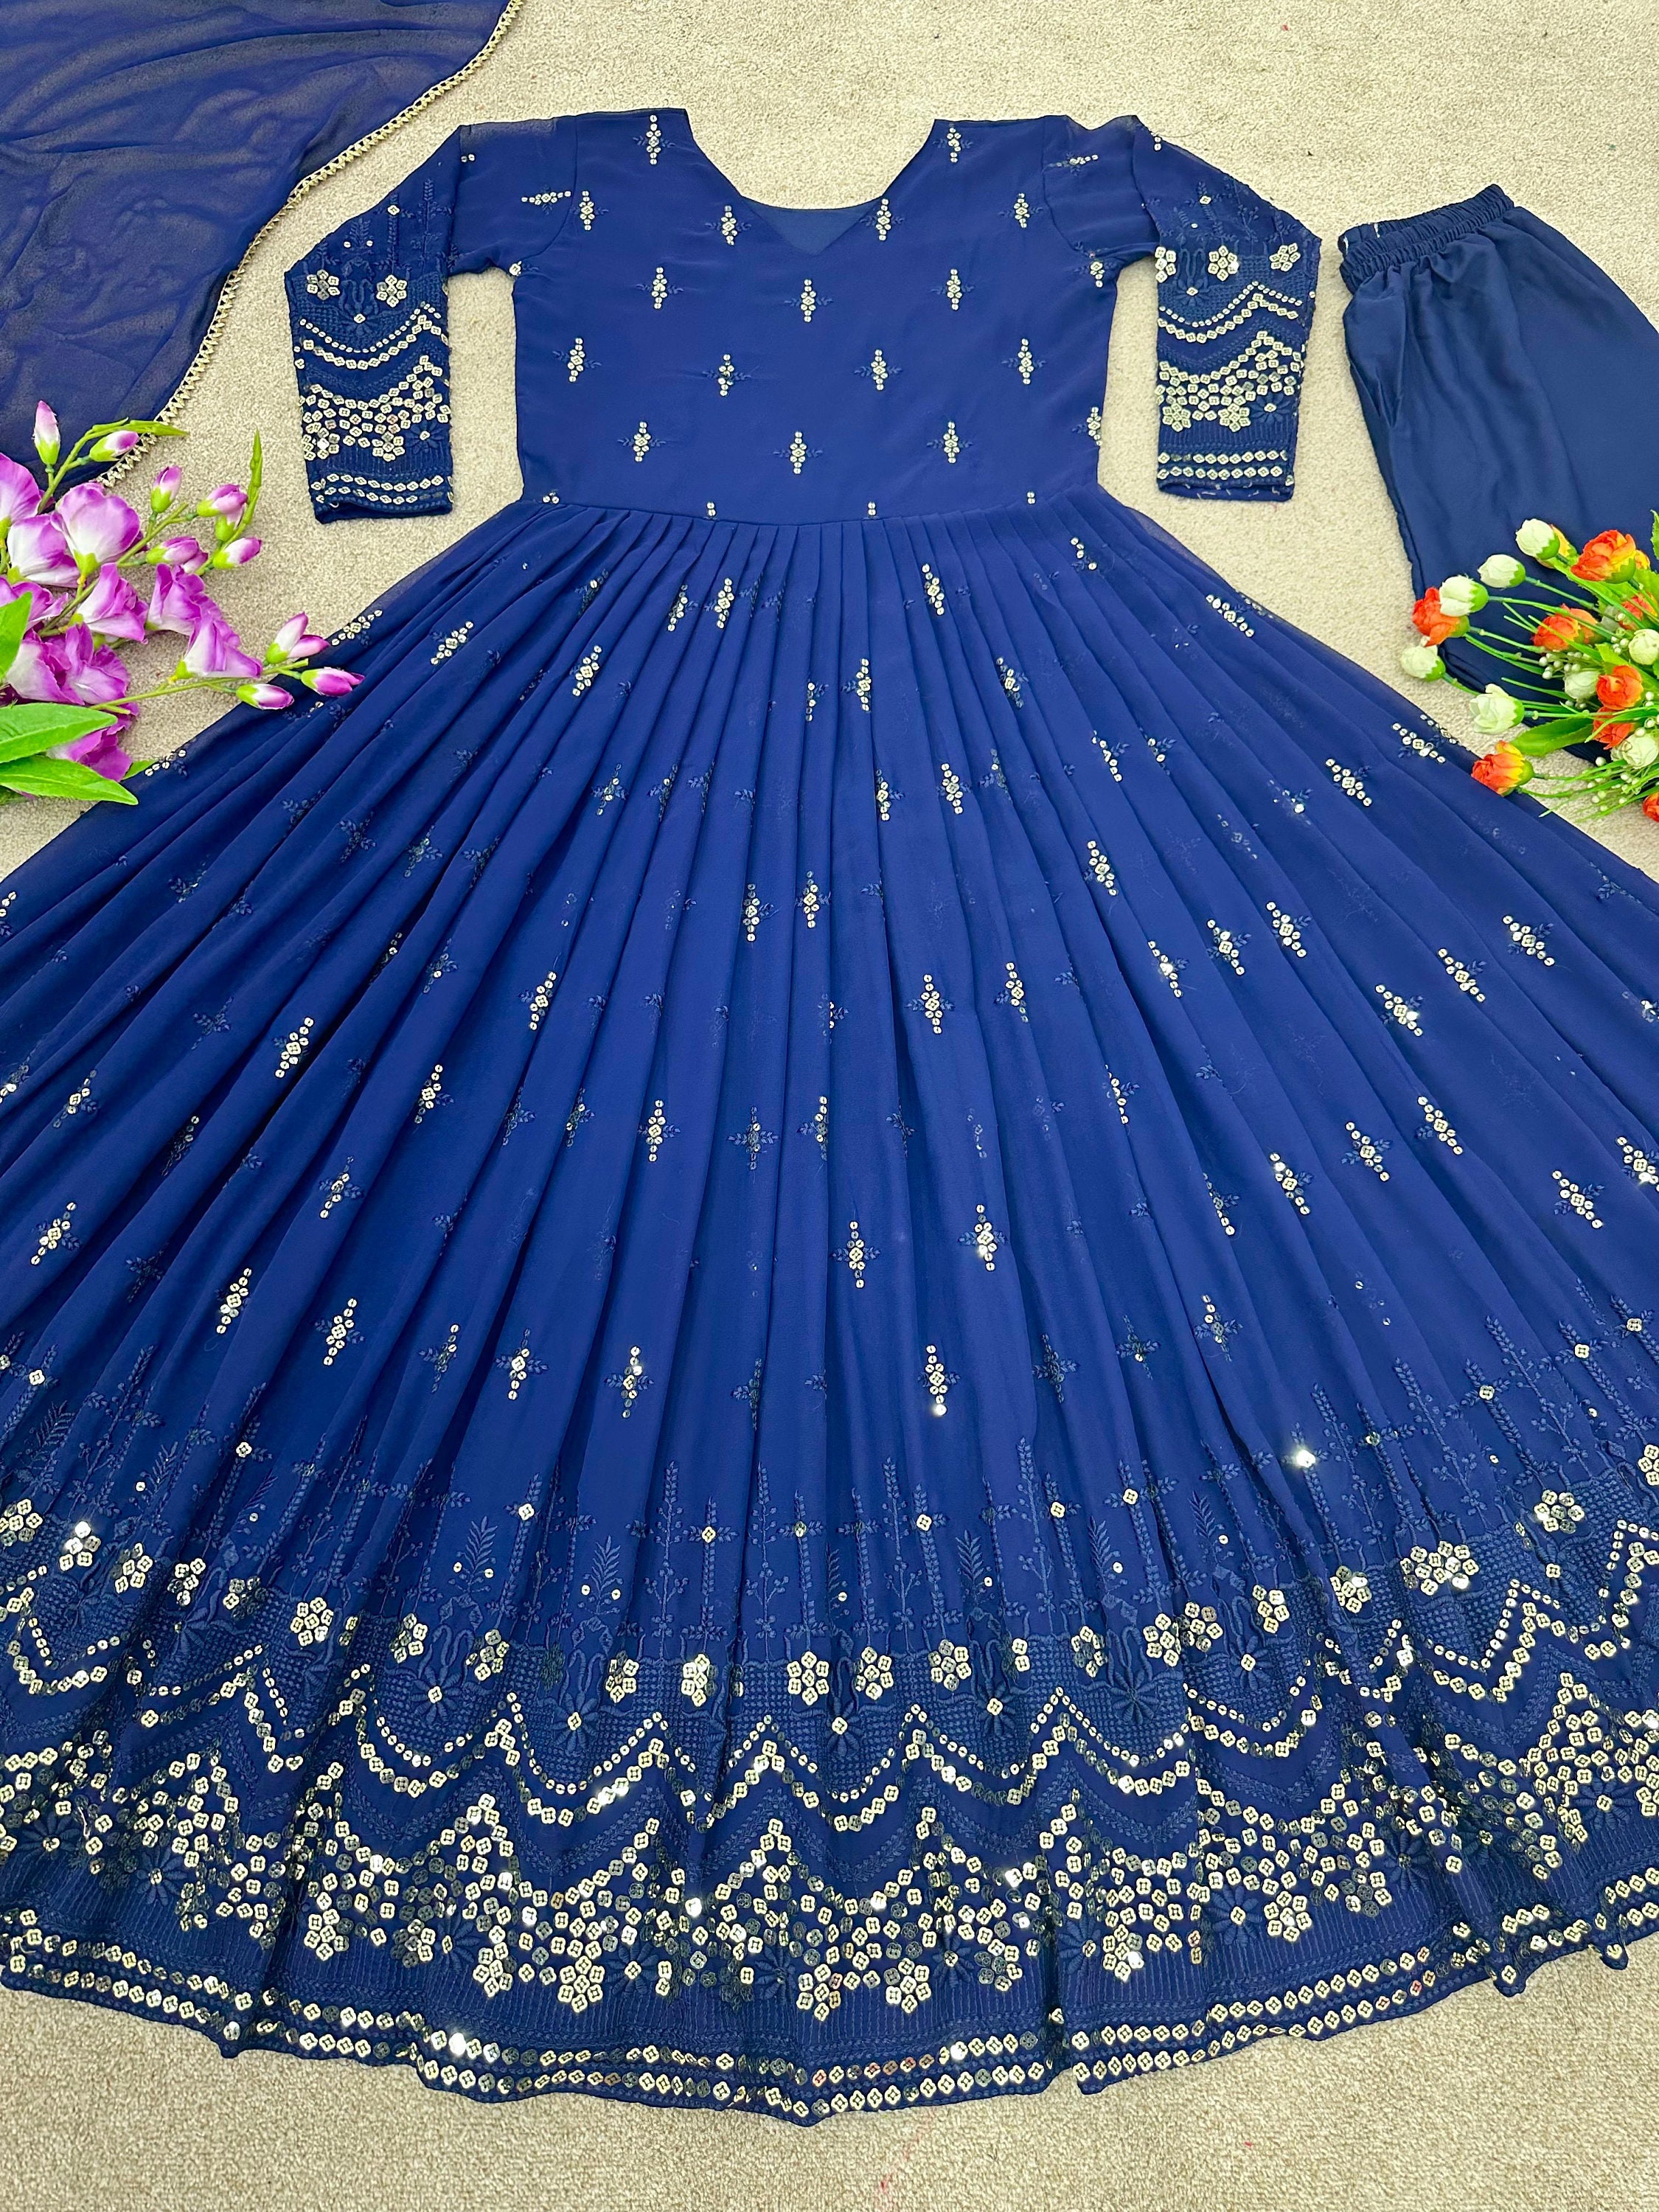 Designer Blue Color Net Fabric Gown For Girls